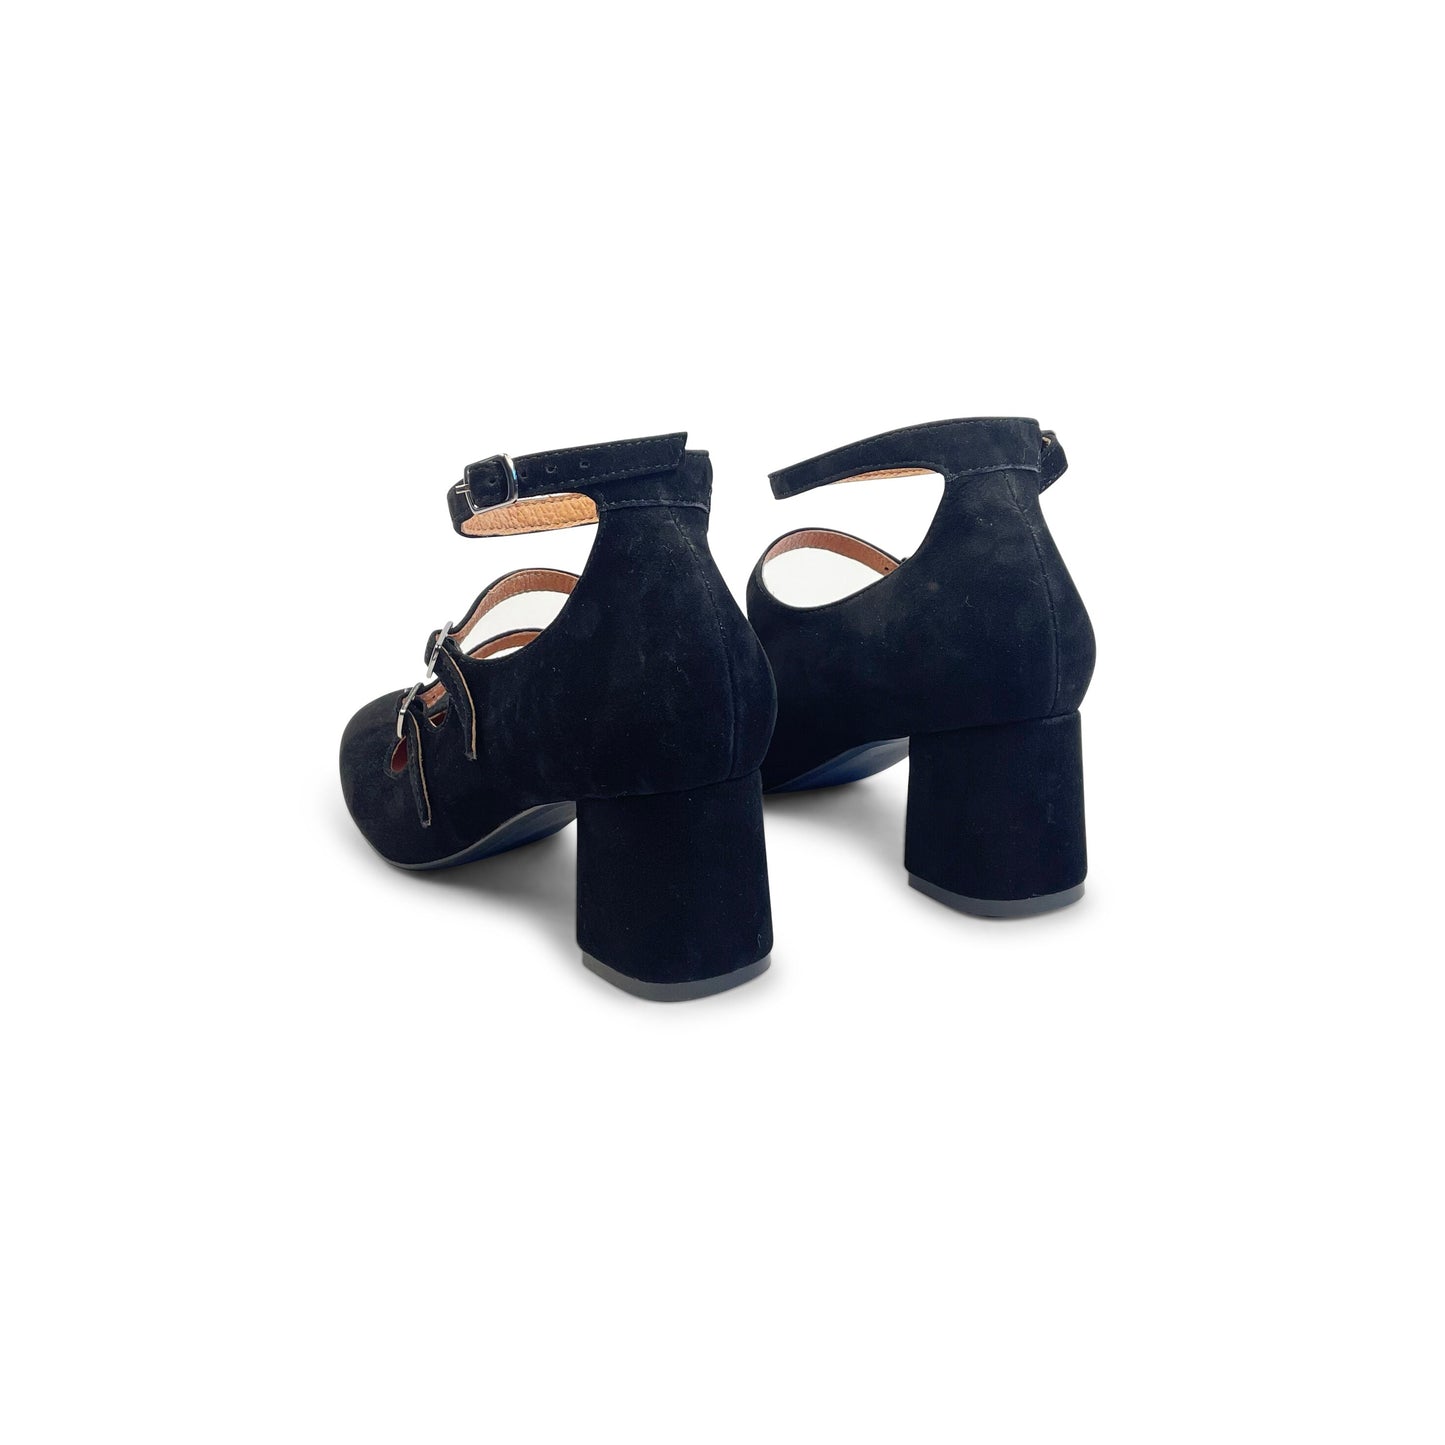 Black Suede Mary Jane Block Heeled Pumps with Three Straps